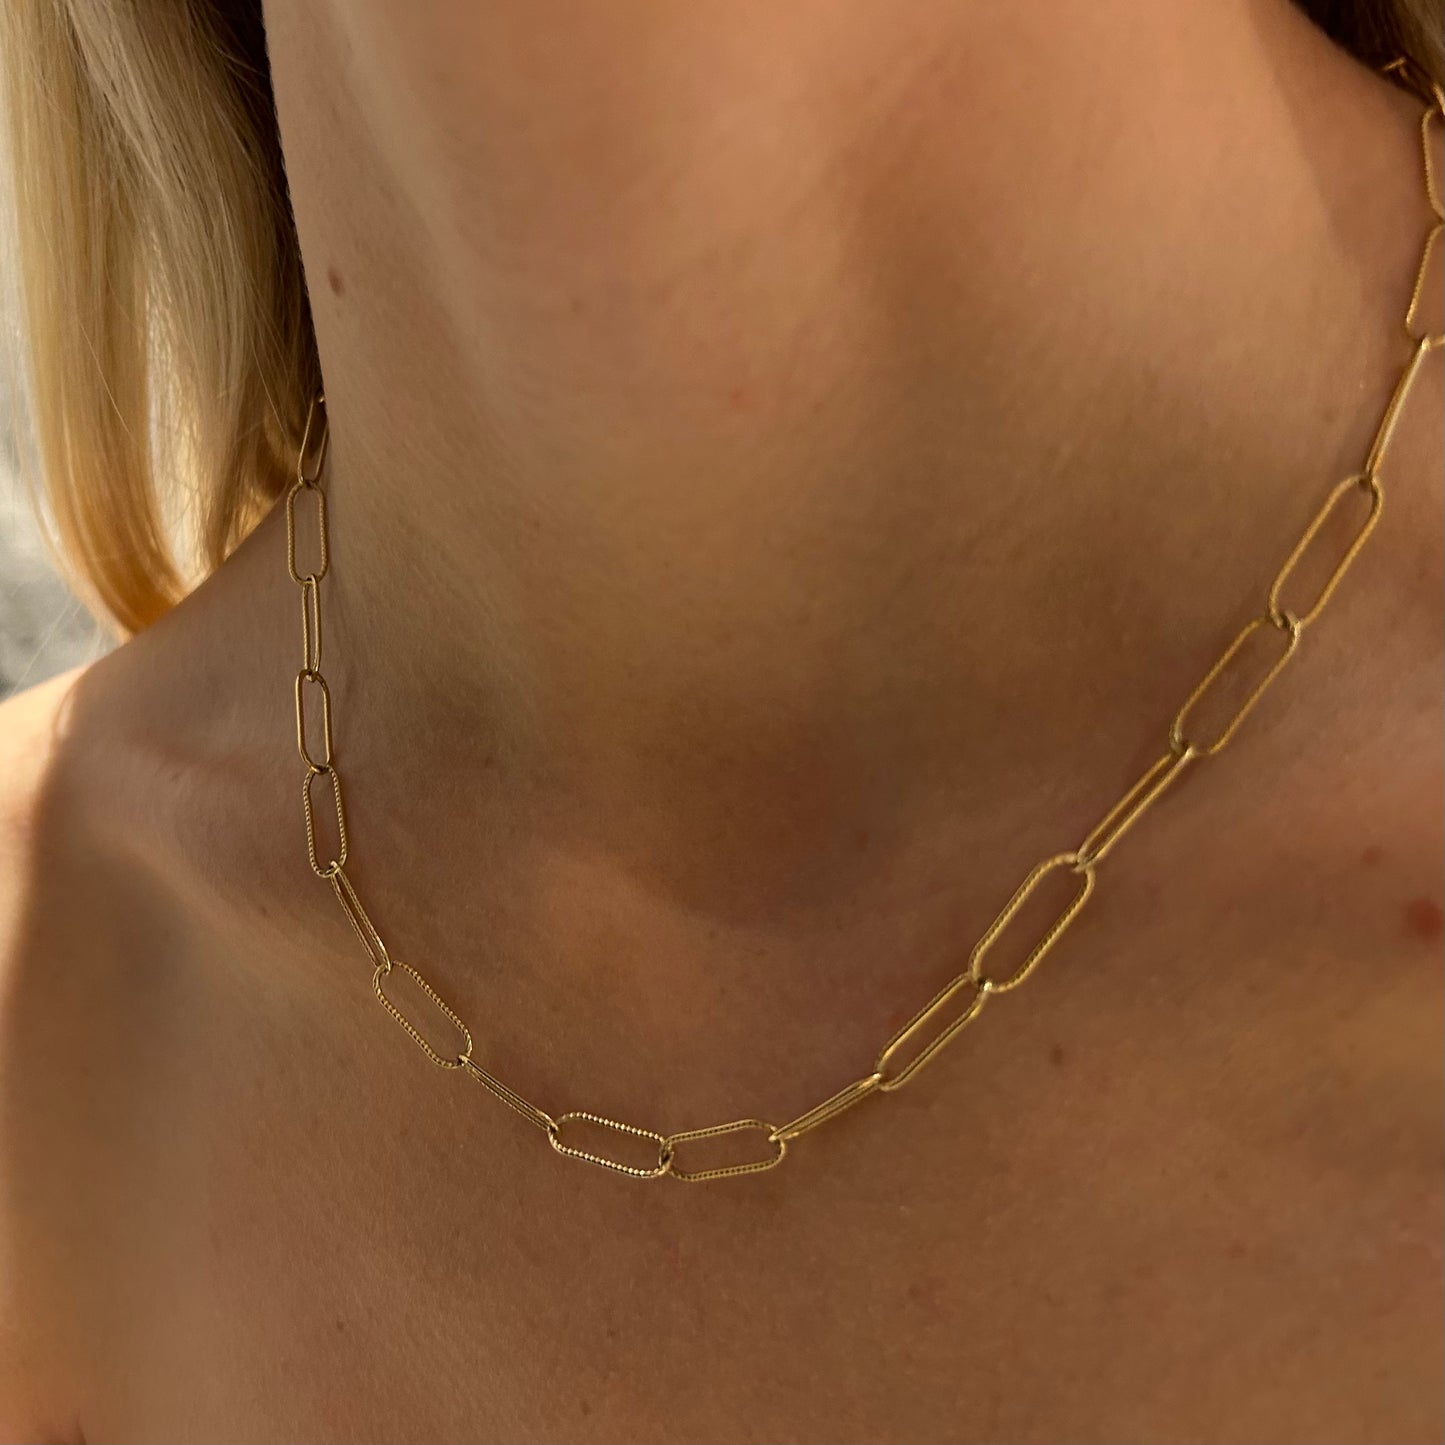 Textured paper clip chain, 14k gold filled necklace